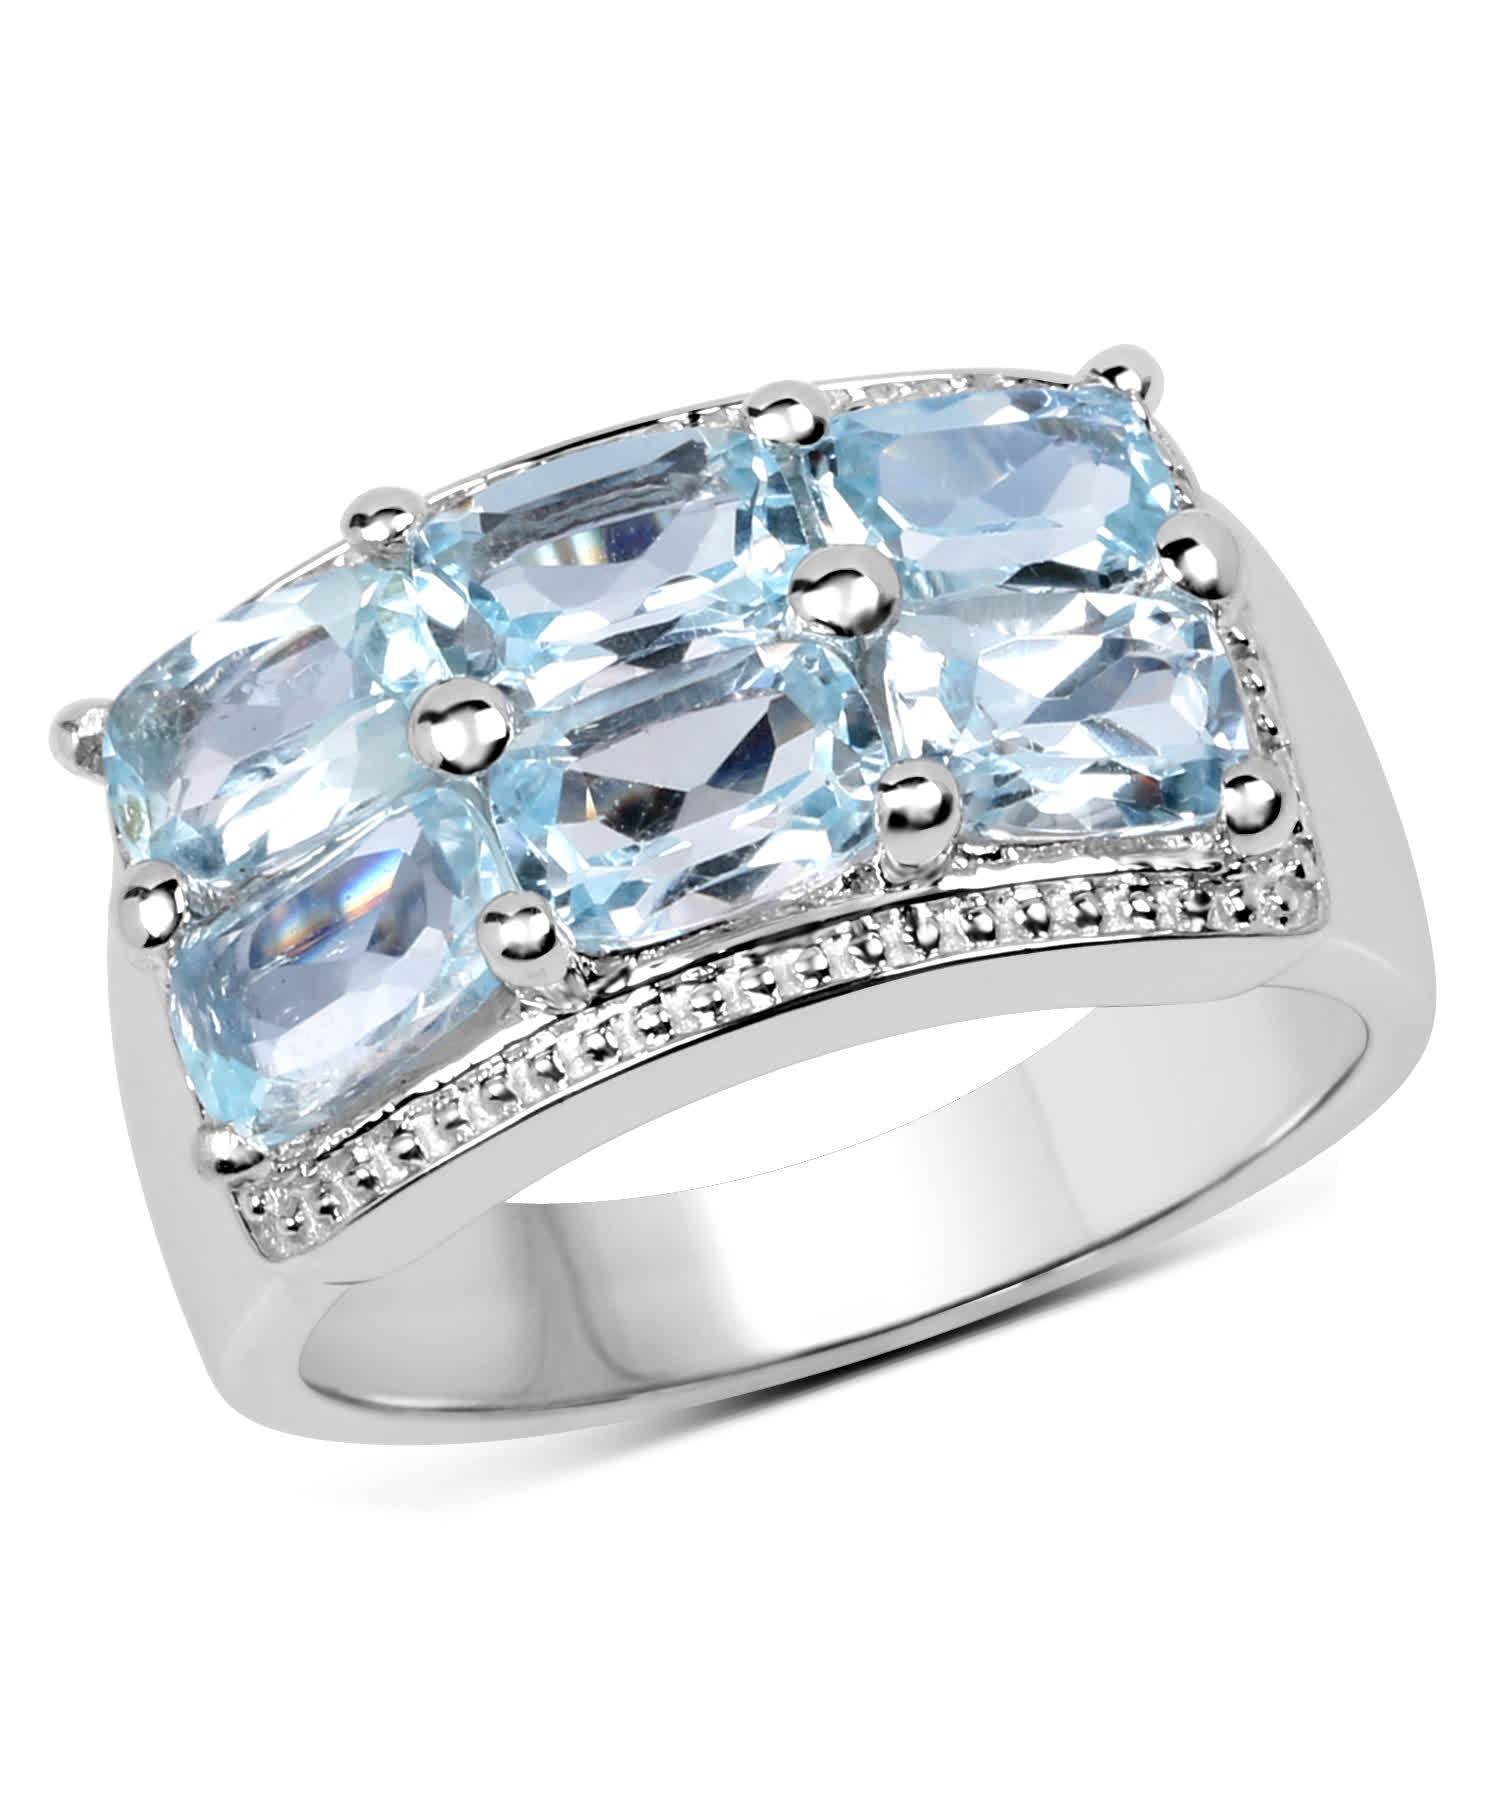 3.60ctw Natural Sky Blue Topaz Rhodium Plated Silver Cocktail Ring View 1